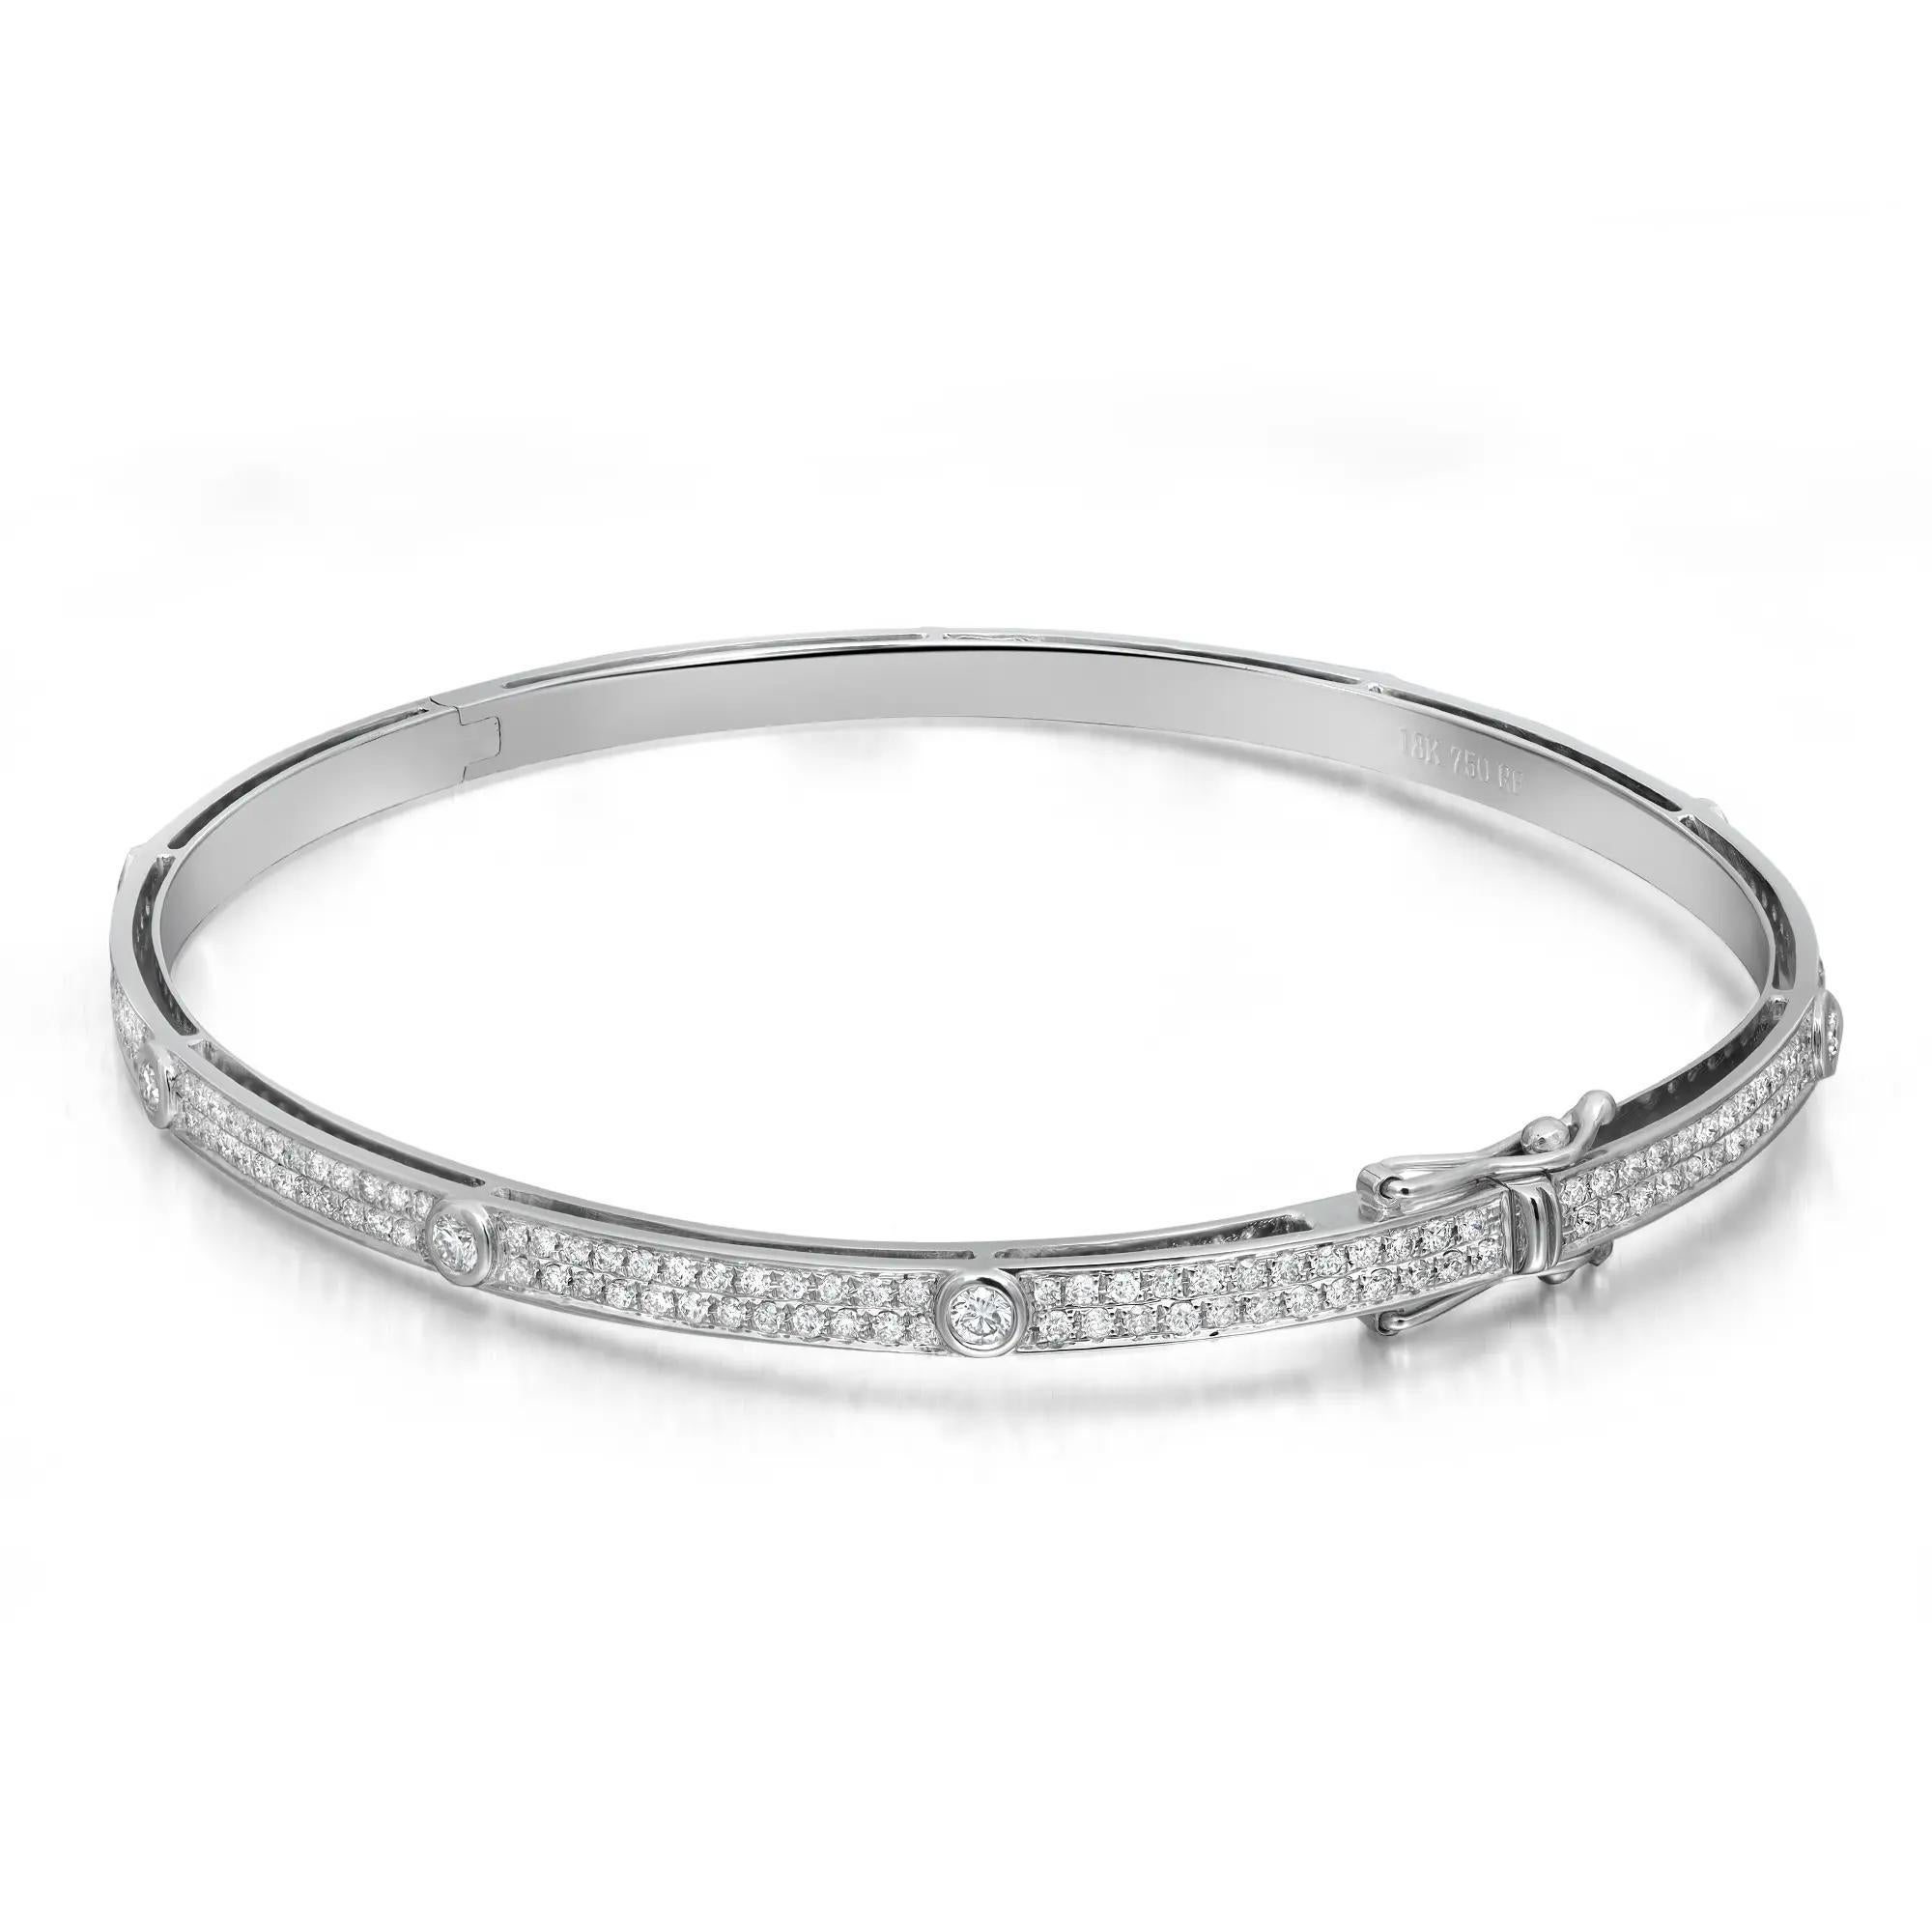 Adorn your wrist with the exquisite allure of our 1.39 Carat Diamond Pavé Bangle Bracelet in 18K White Gold. This captivating piece boasts a total carat weight of 1.39, featuring a dazzling array of diamonds meticulously set in a graceful pavé